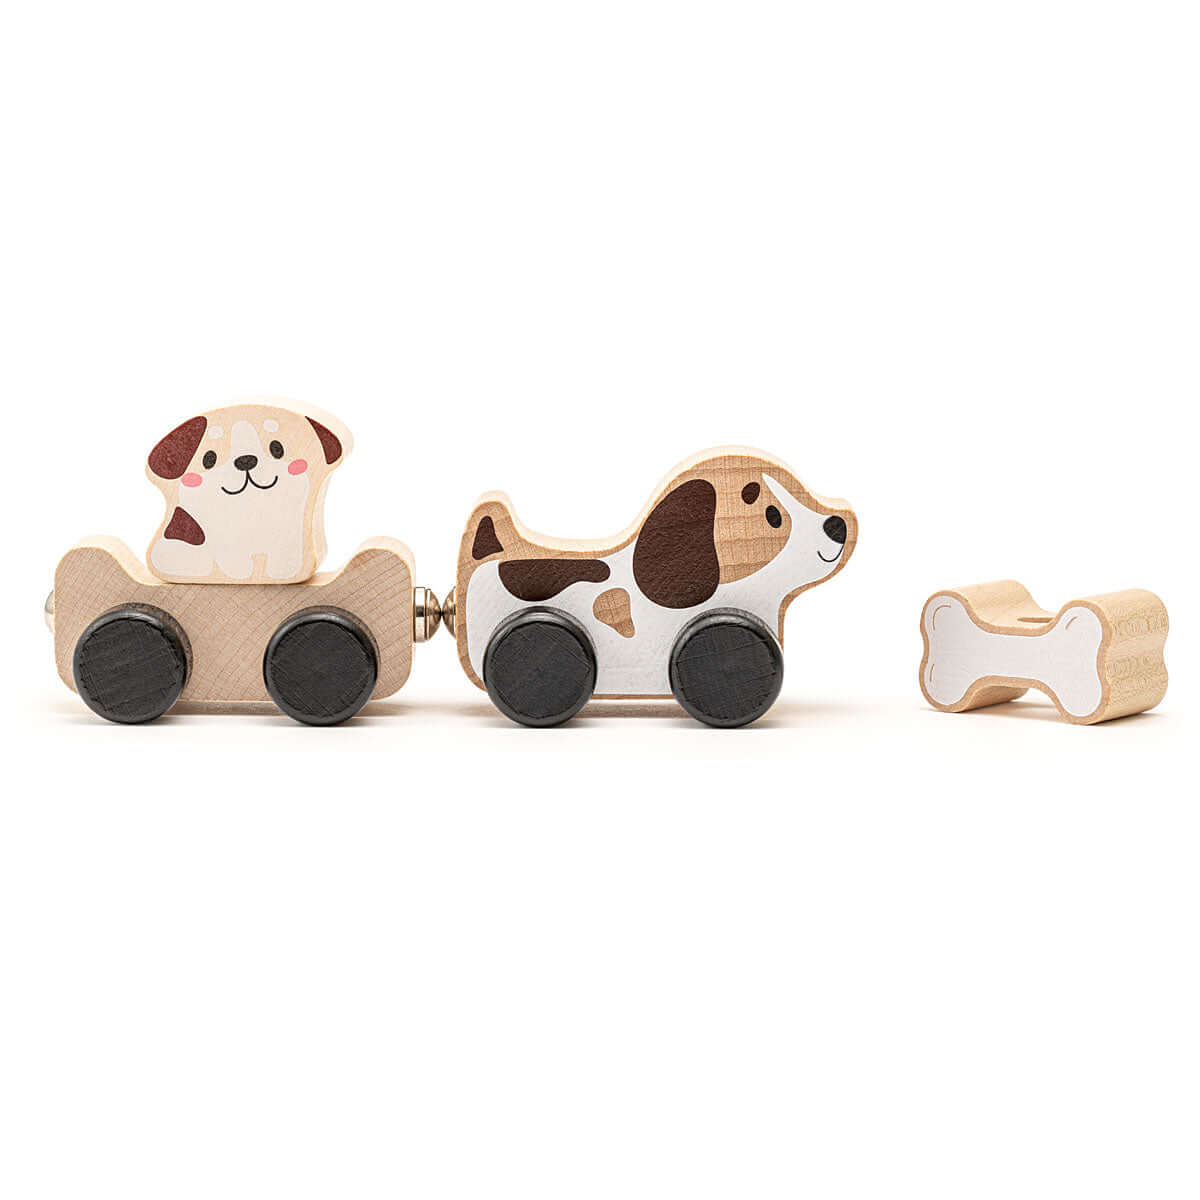 Clever Puppies Wooden Train, Cubika, eco-friendly Toys, Mountain Kids Toys